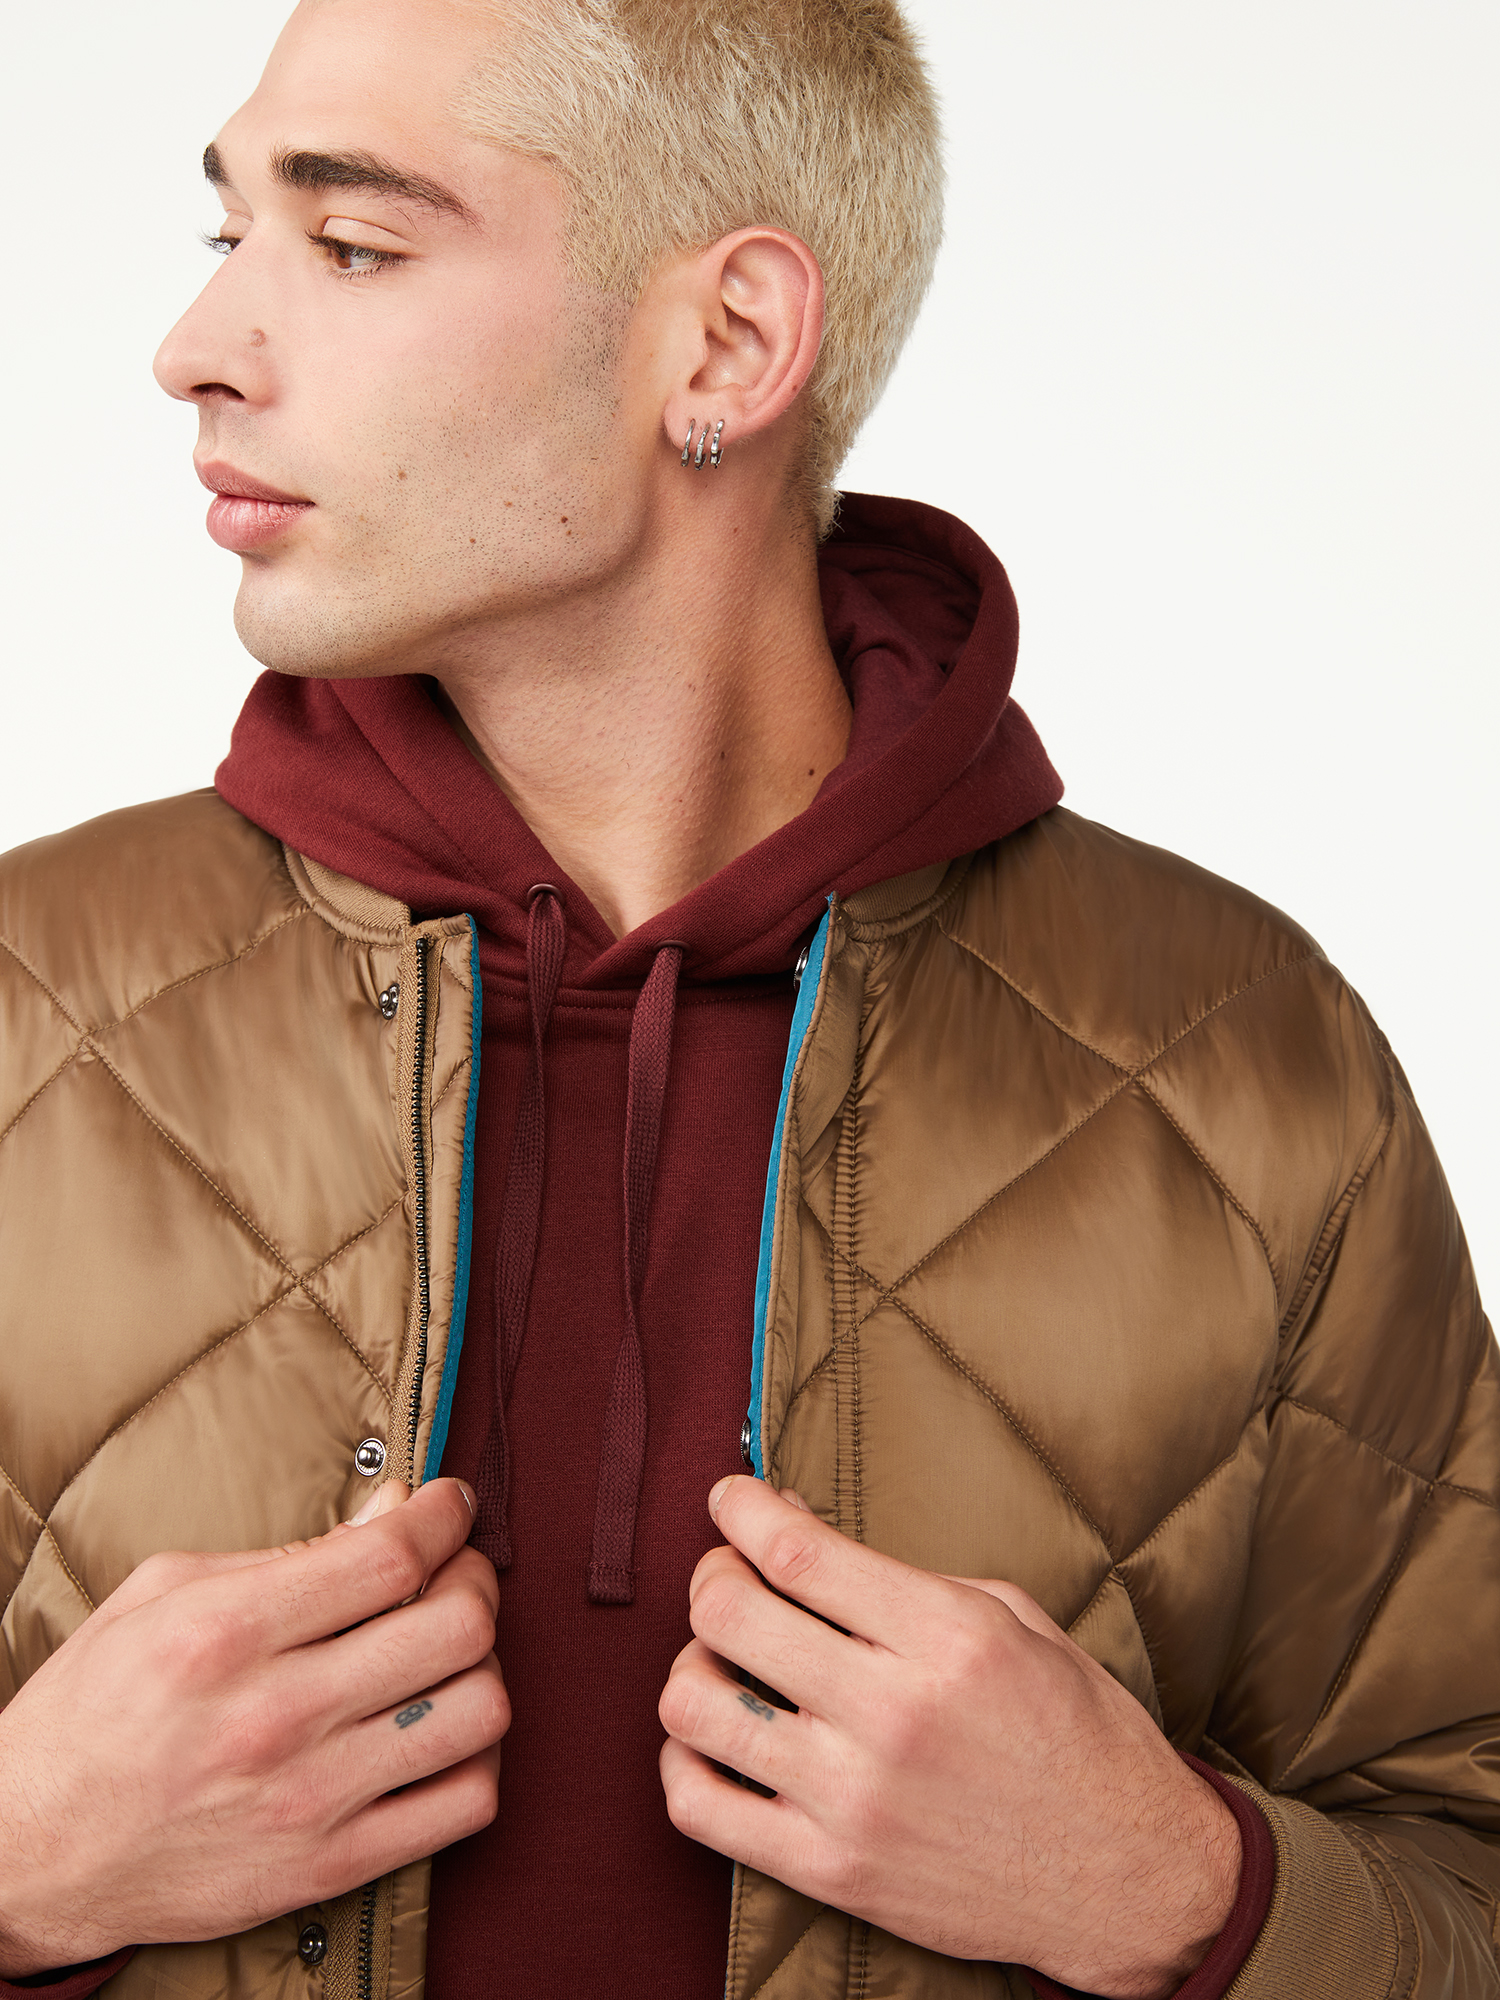 Free Assembly Men's Quilted Bomber Jacket - image 5 of 6